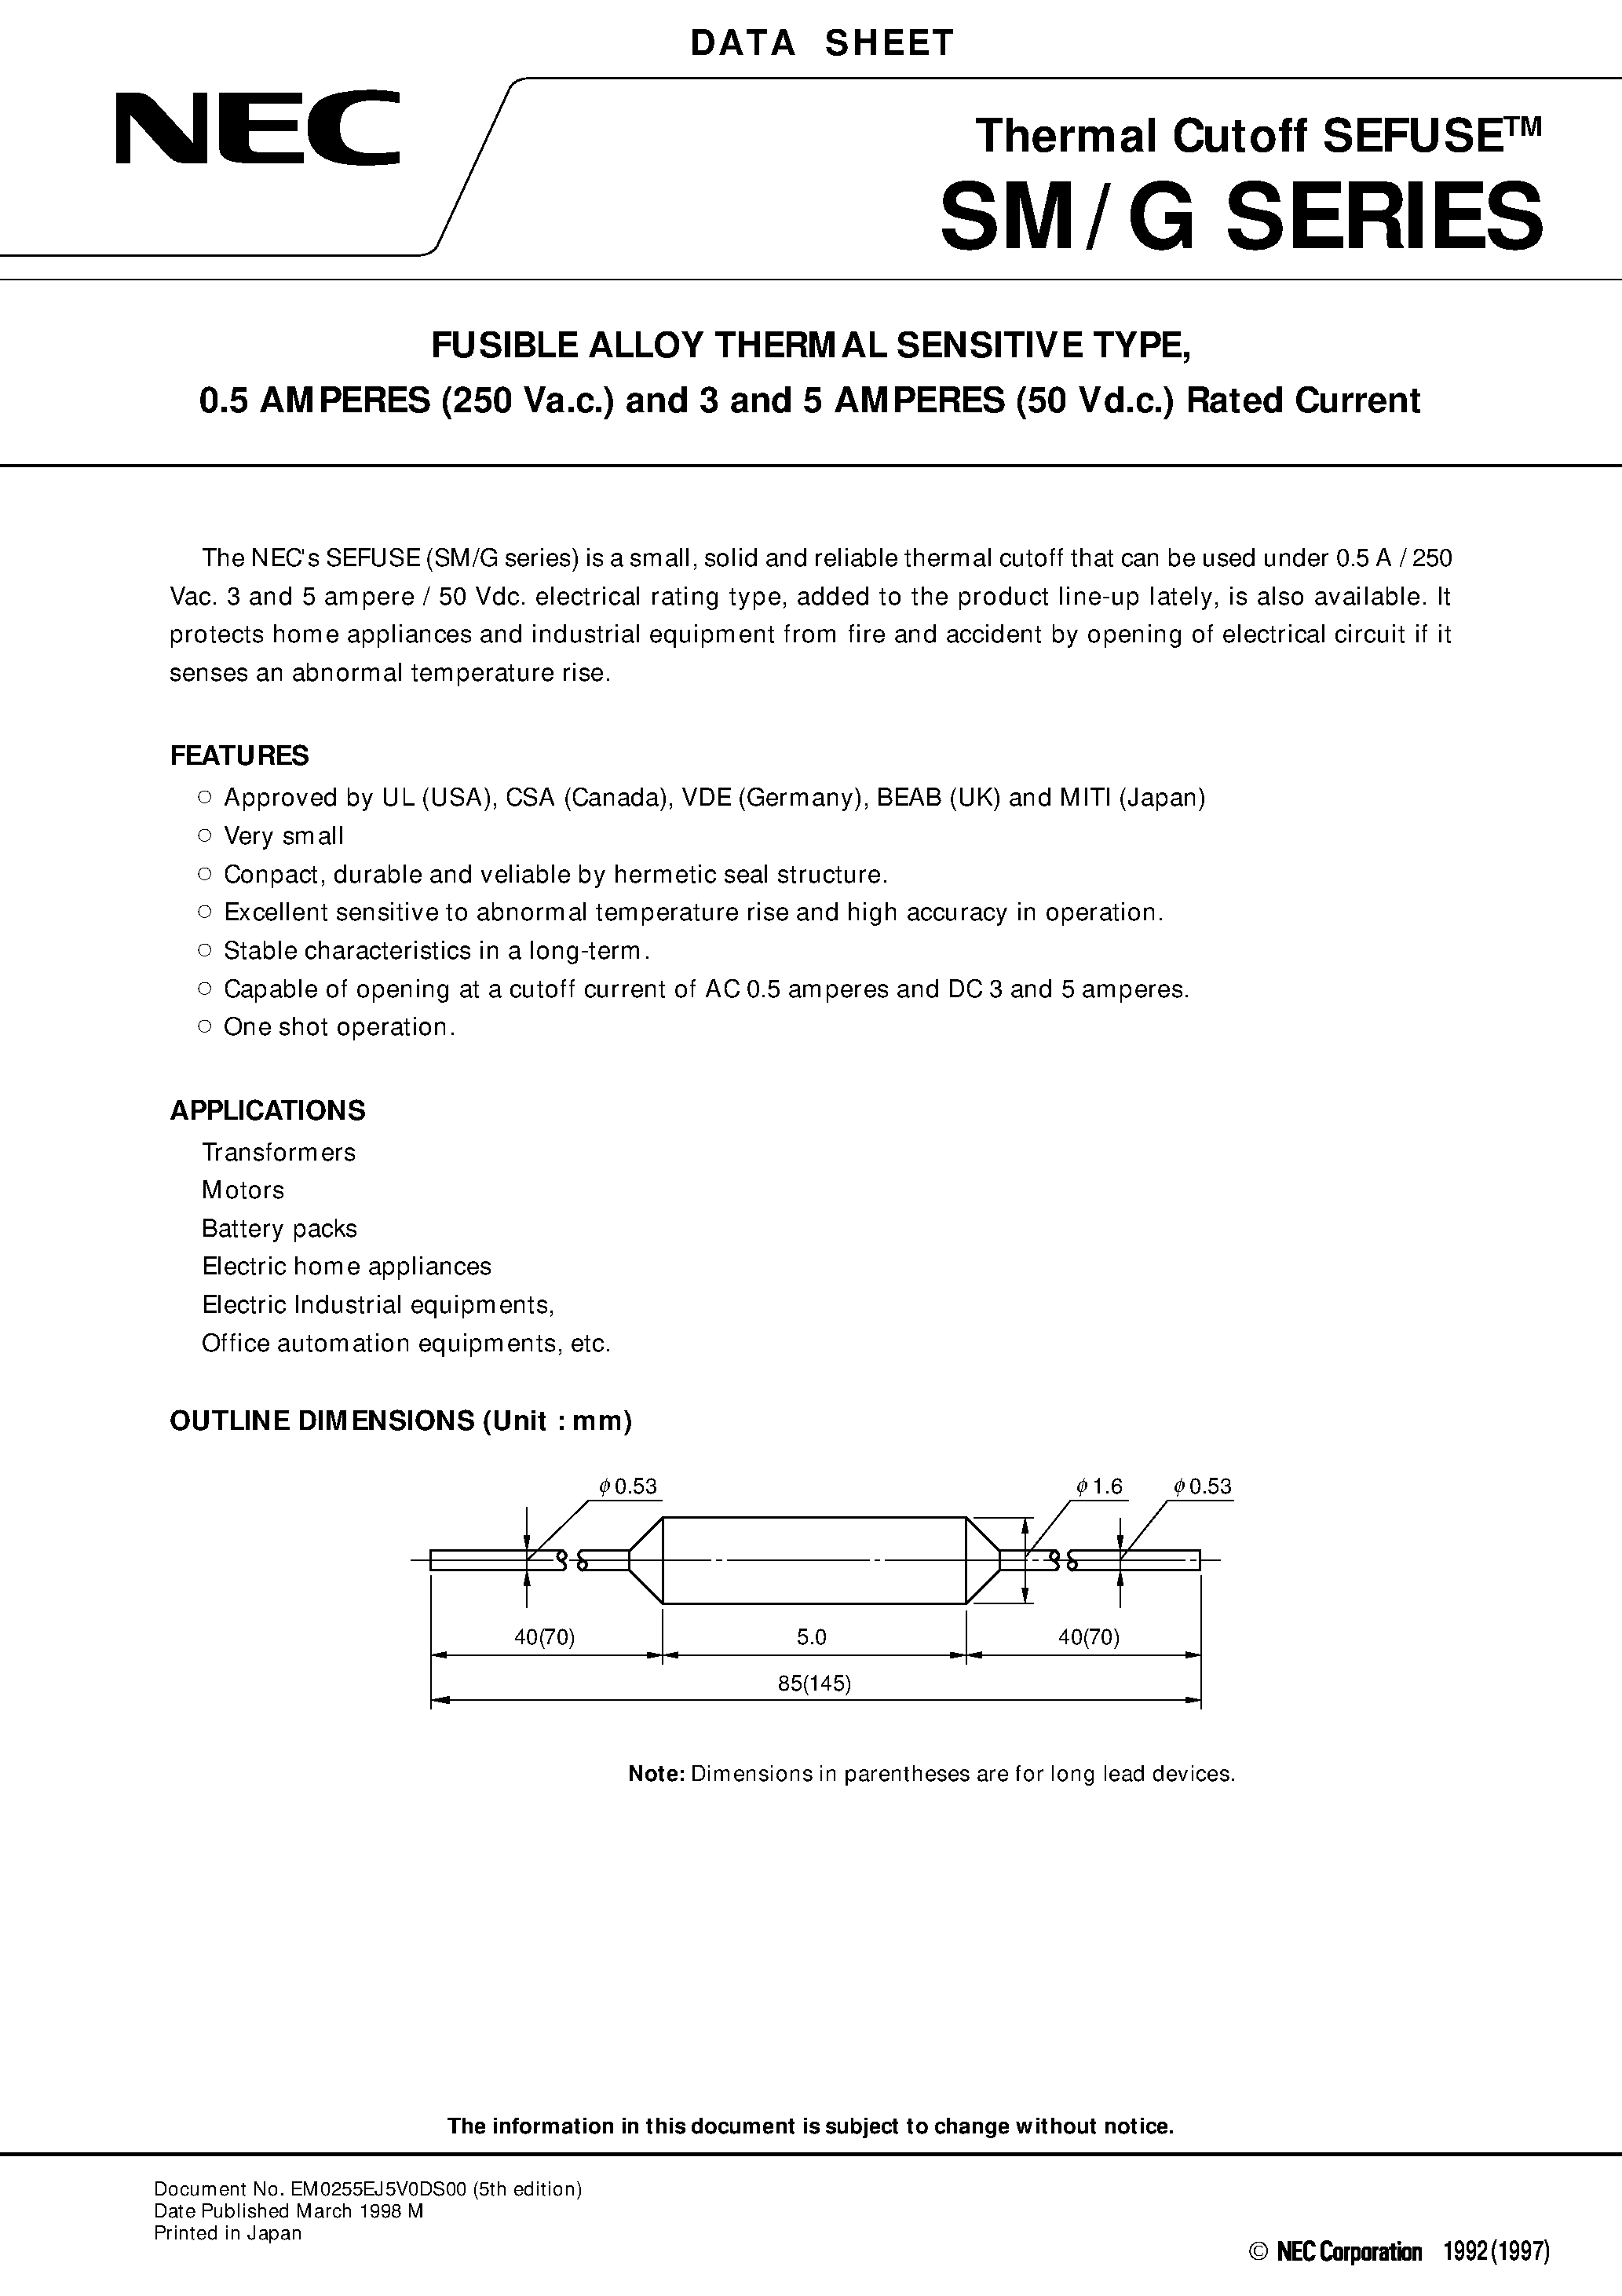 Datasheet SM130G0 - FUSIBLE ALLOY THERMAL SENSITIVE TYPE/ 0.5 AMPERES 250 Va.c. and 3 and 5 AMPERES 50 Vd.c. Rated Current page 1